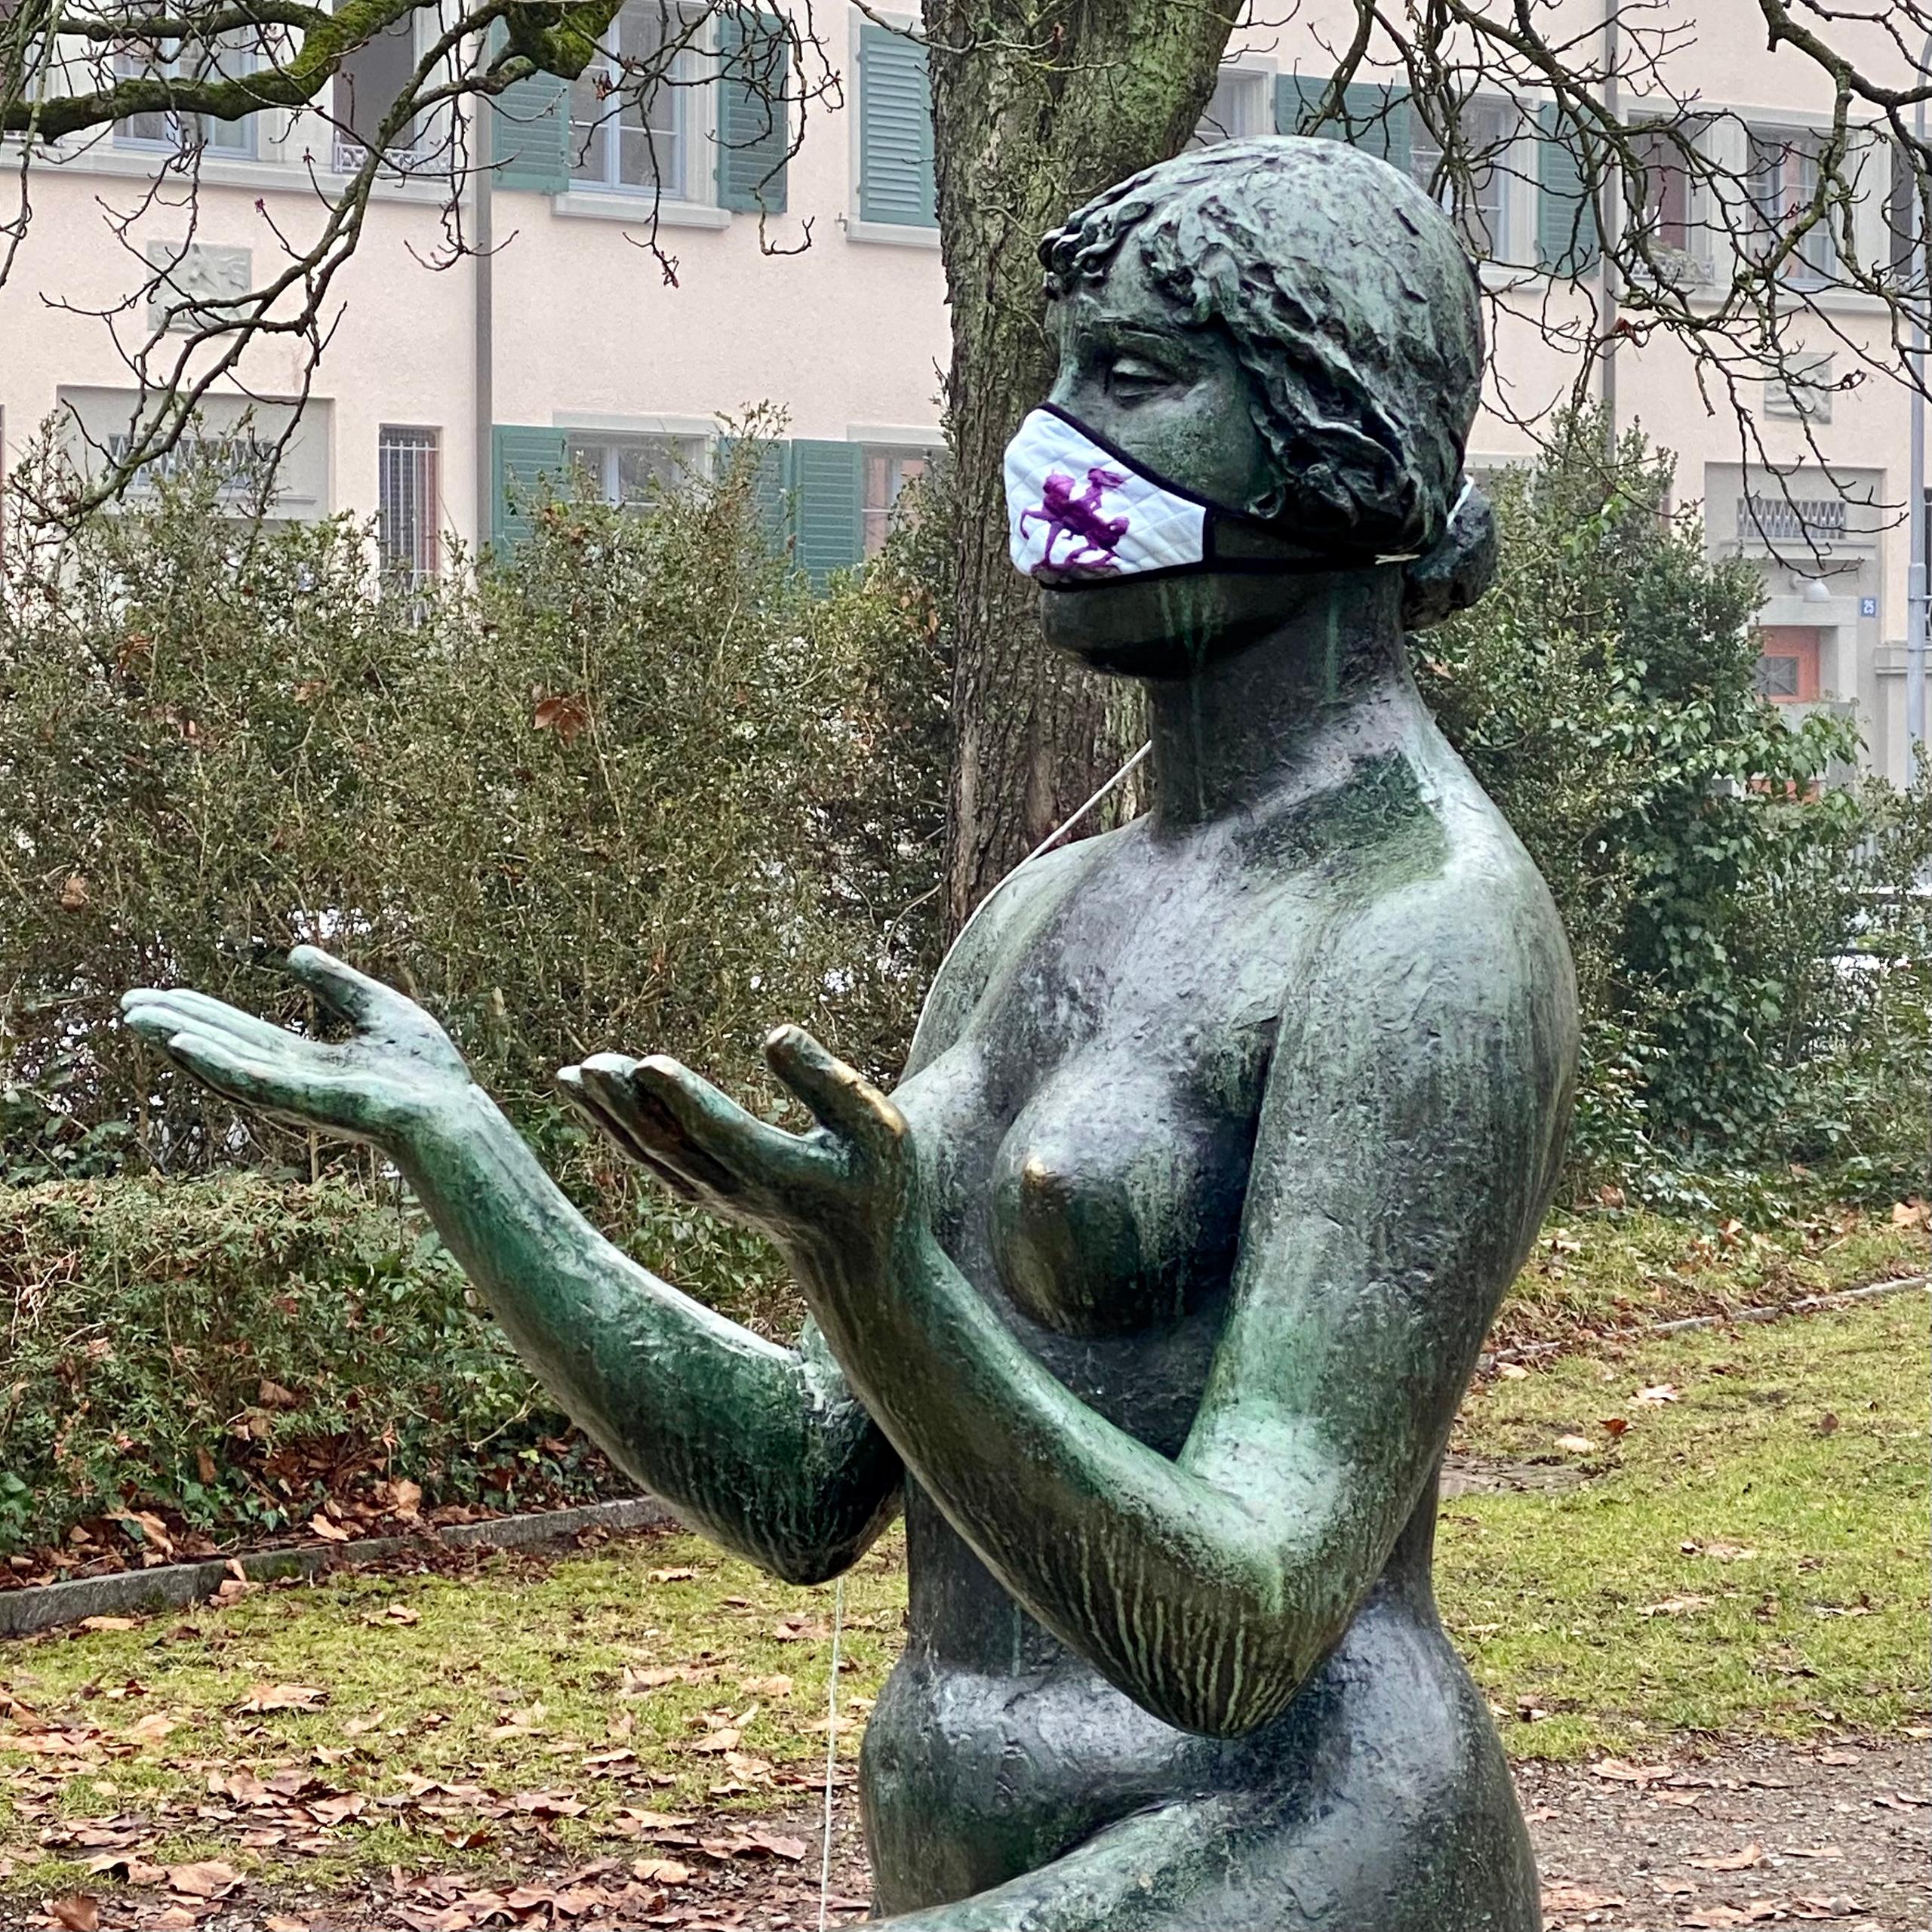 Do women have to be naked to be shown in Zurich's public space?' - SWI